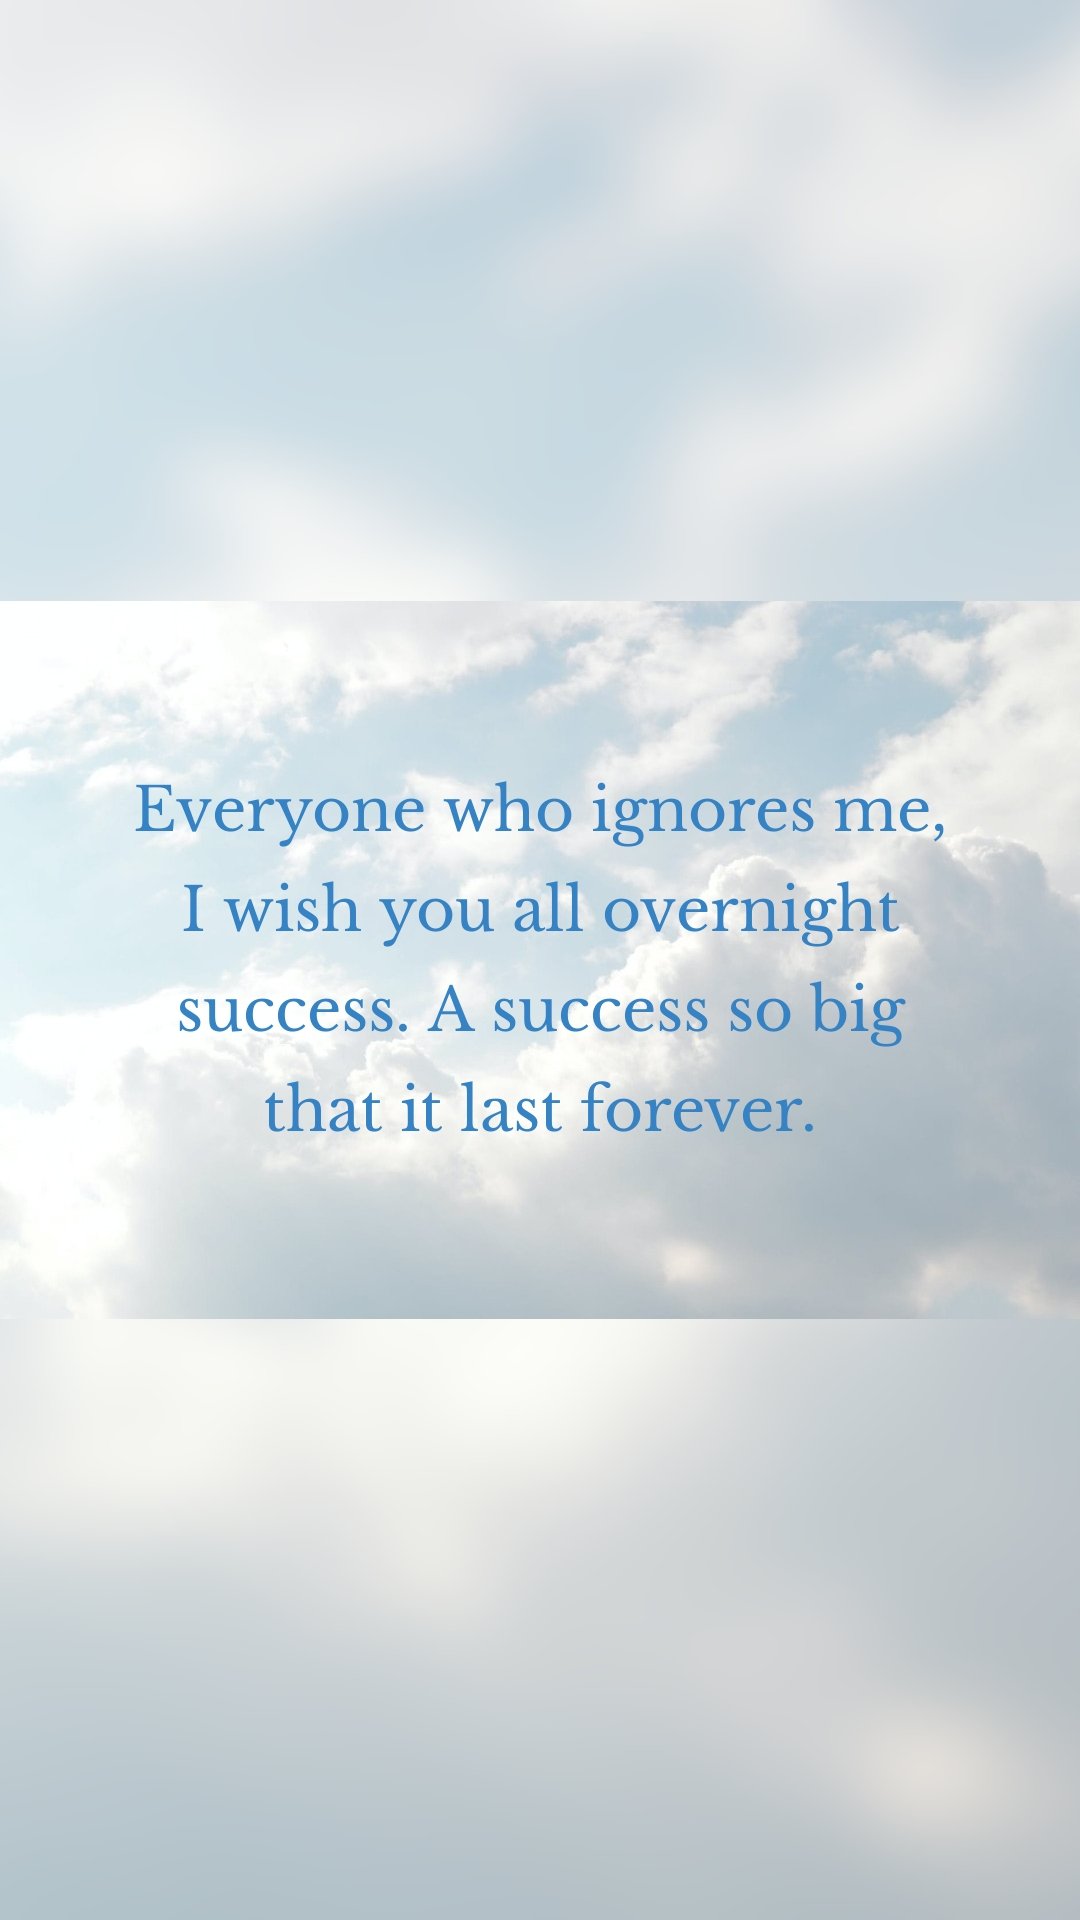 Everyone who ignores me, I wish you all overnight success. A success so big that it last forever.